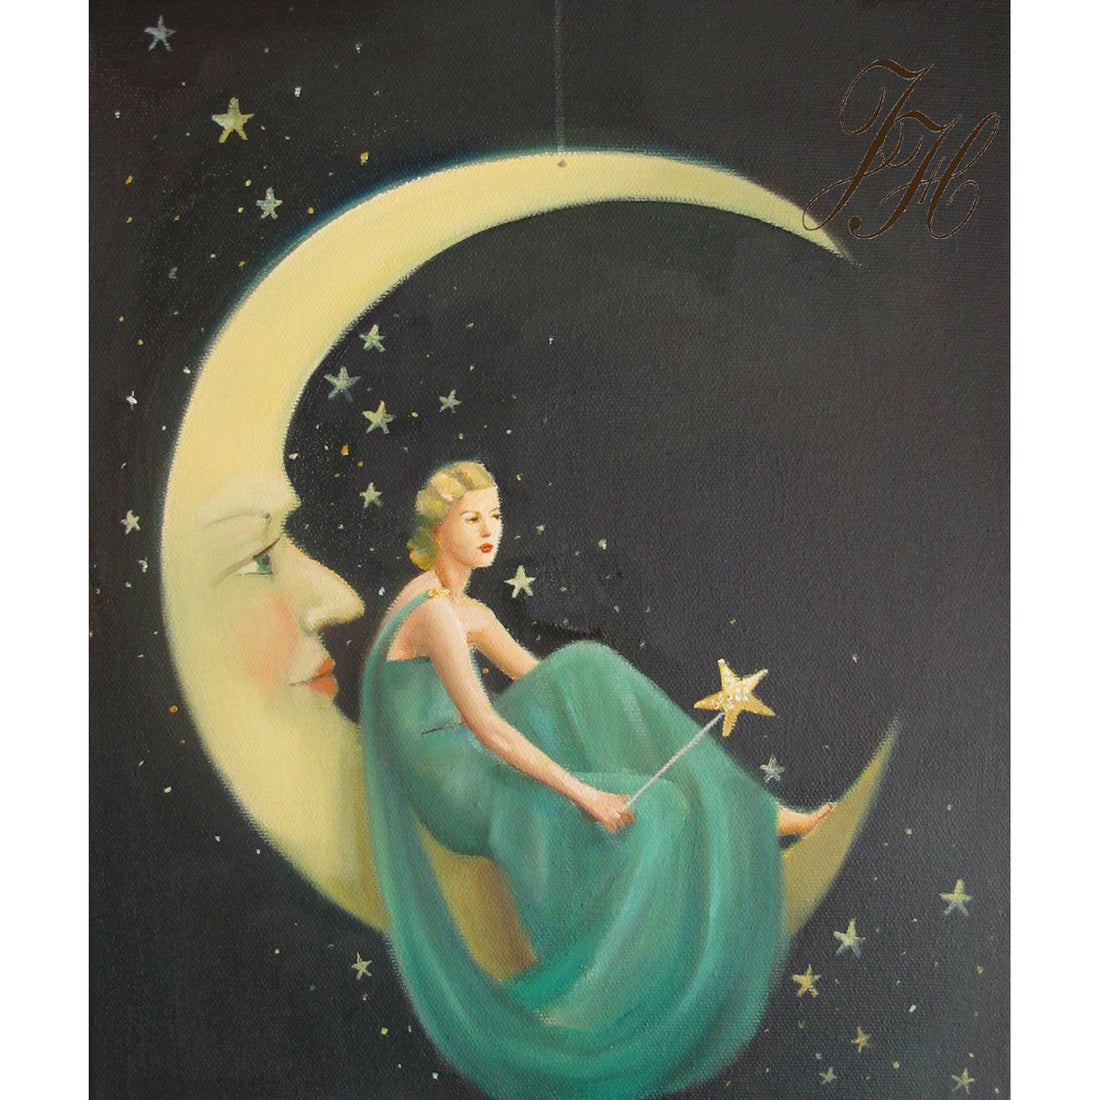 A painting by Janet Hill of a woman sitting on the moon featuring the Phoebe Small Art Print.